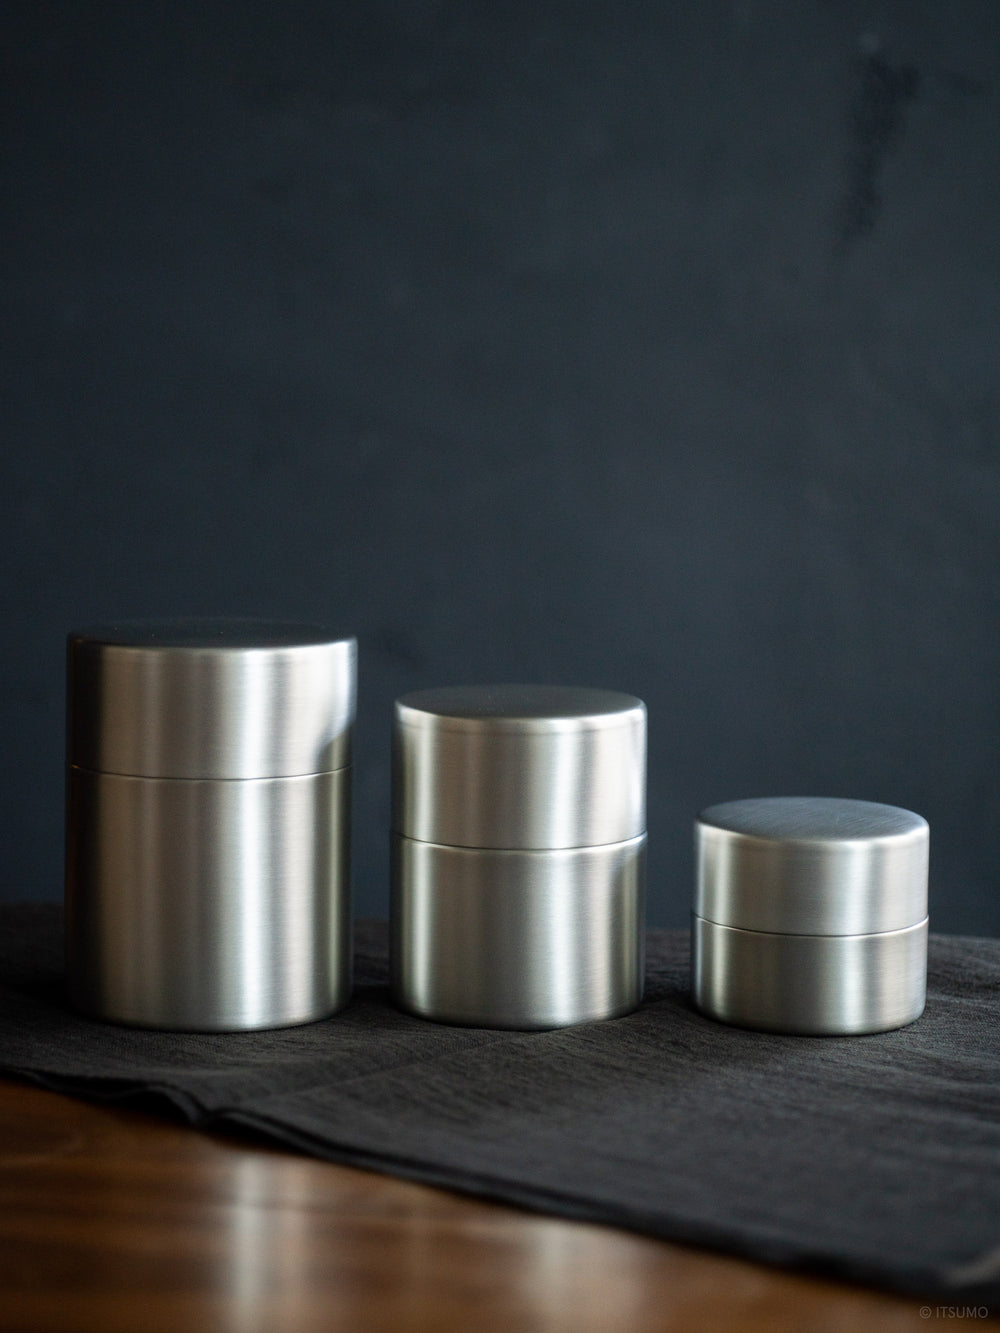 Azmaya tin plated copper tea canisters next to each other in small, medium and large